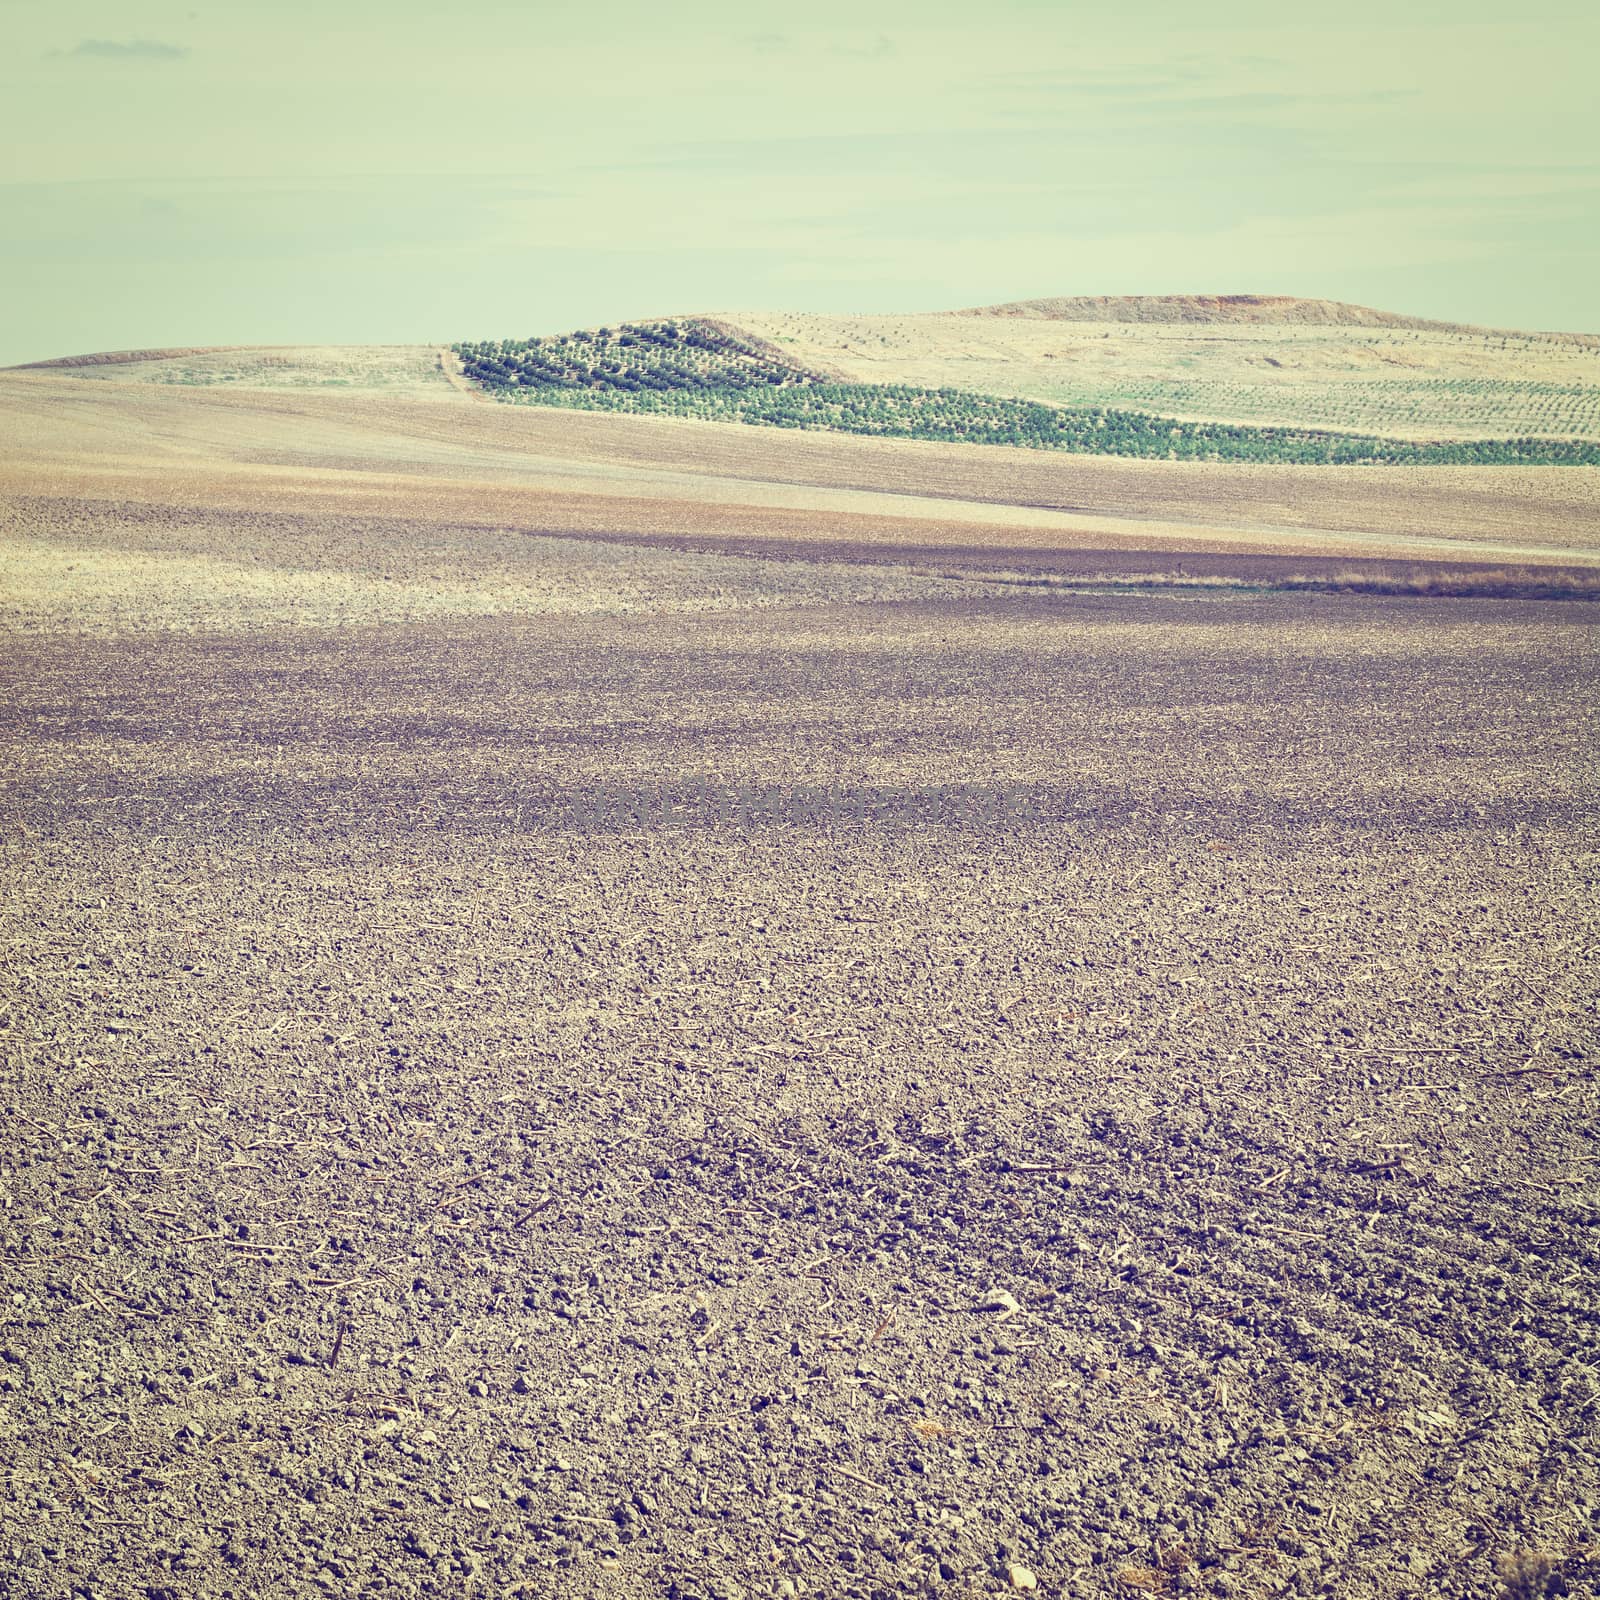 Plowed Sloping Hills of Spain in the Autumn on the Background of the Olive Groves, Instagram Effect